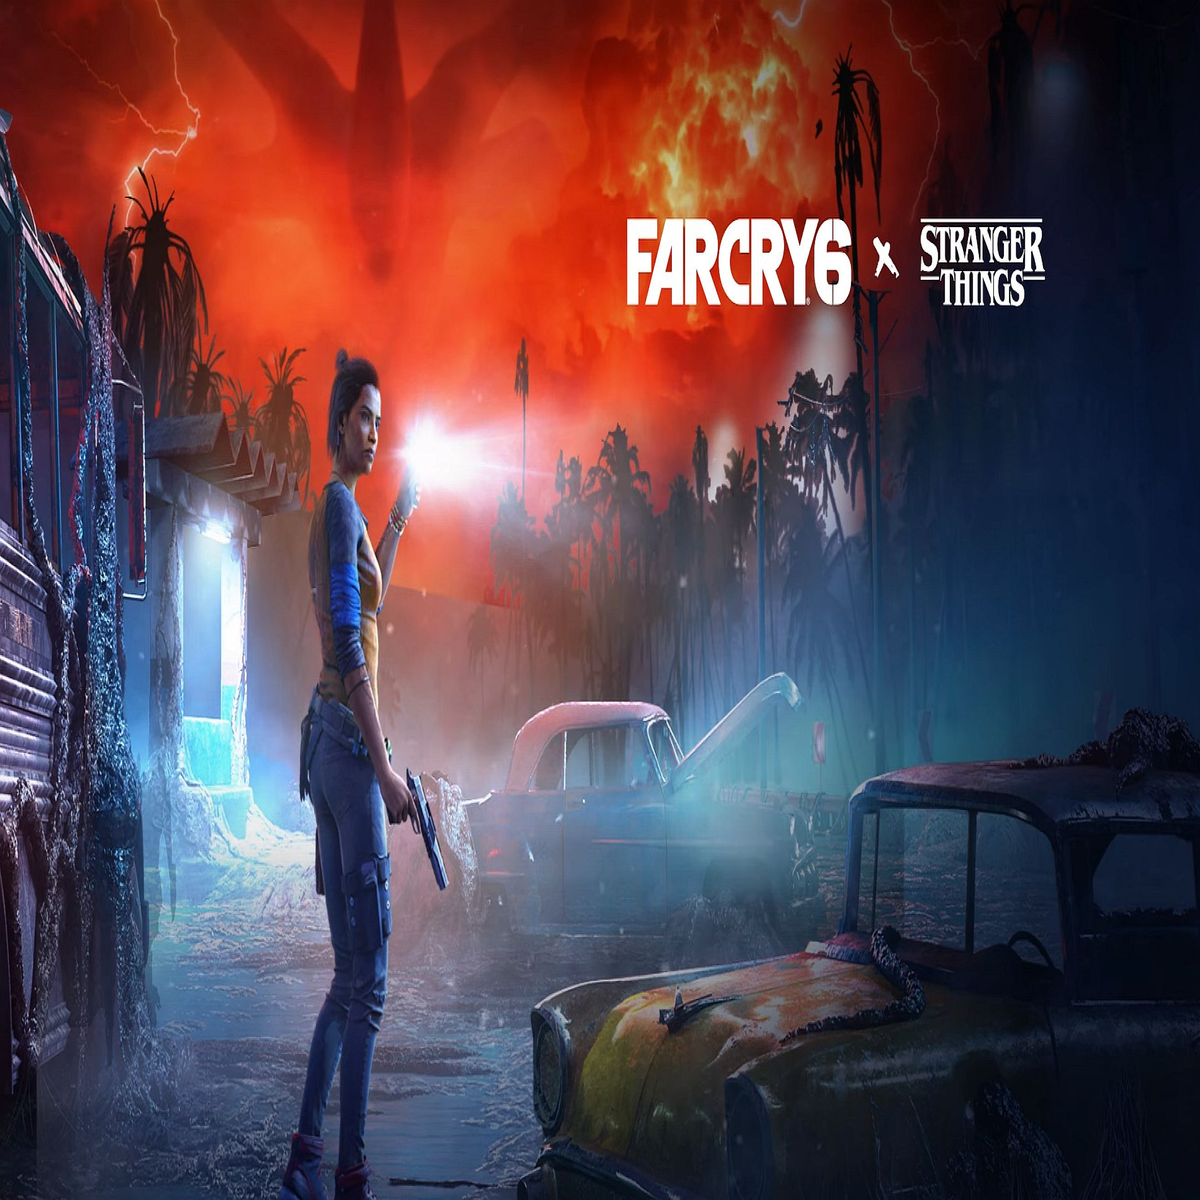 FAR CRY 6 X STRANGER THINGS CONFIRMED : r/farcry